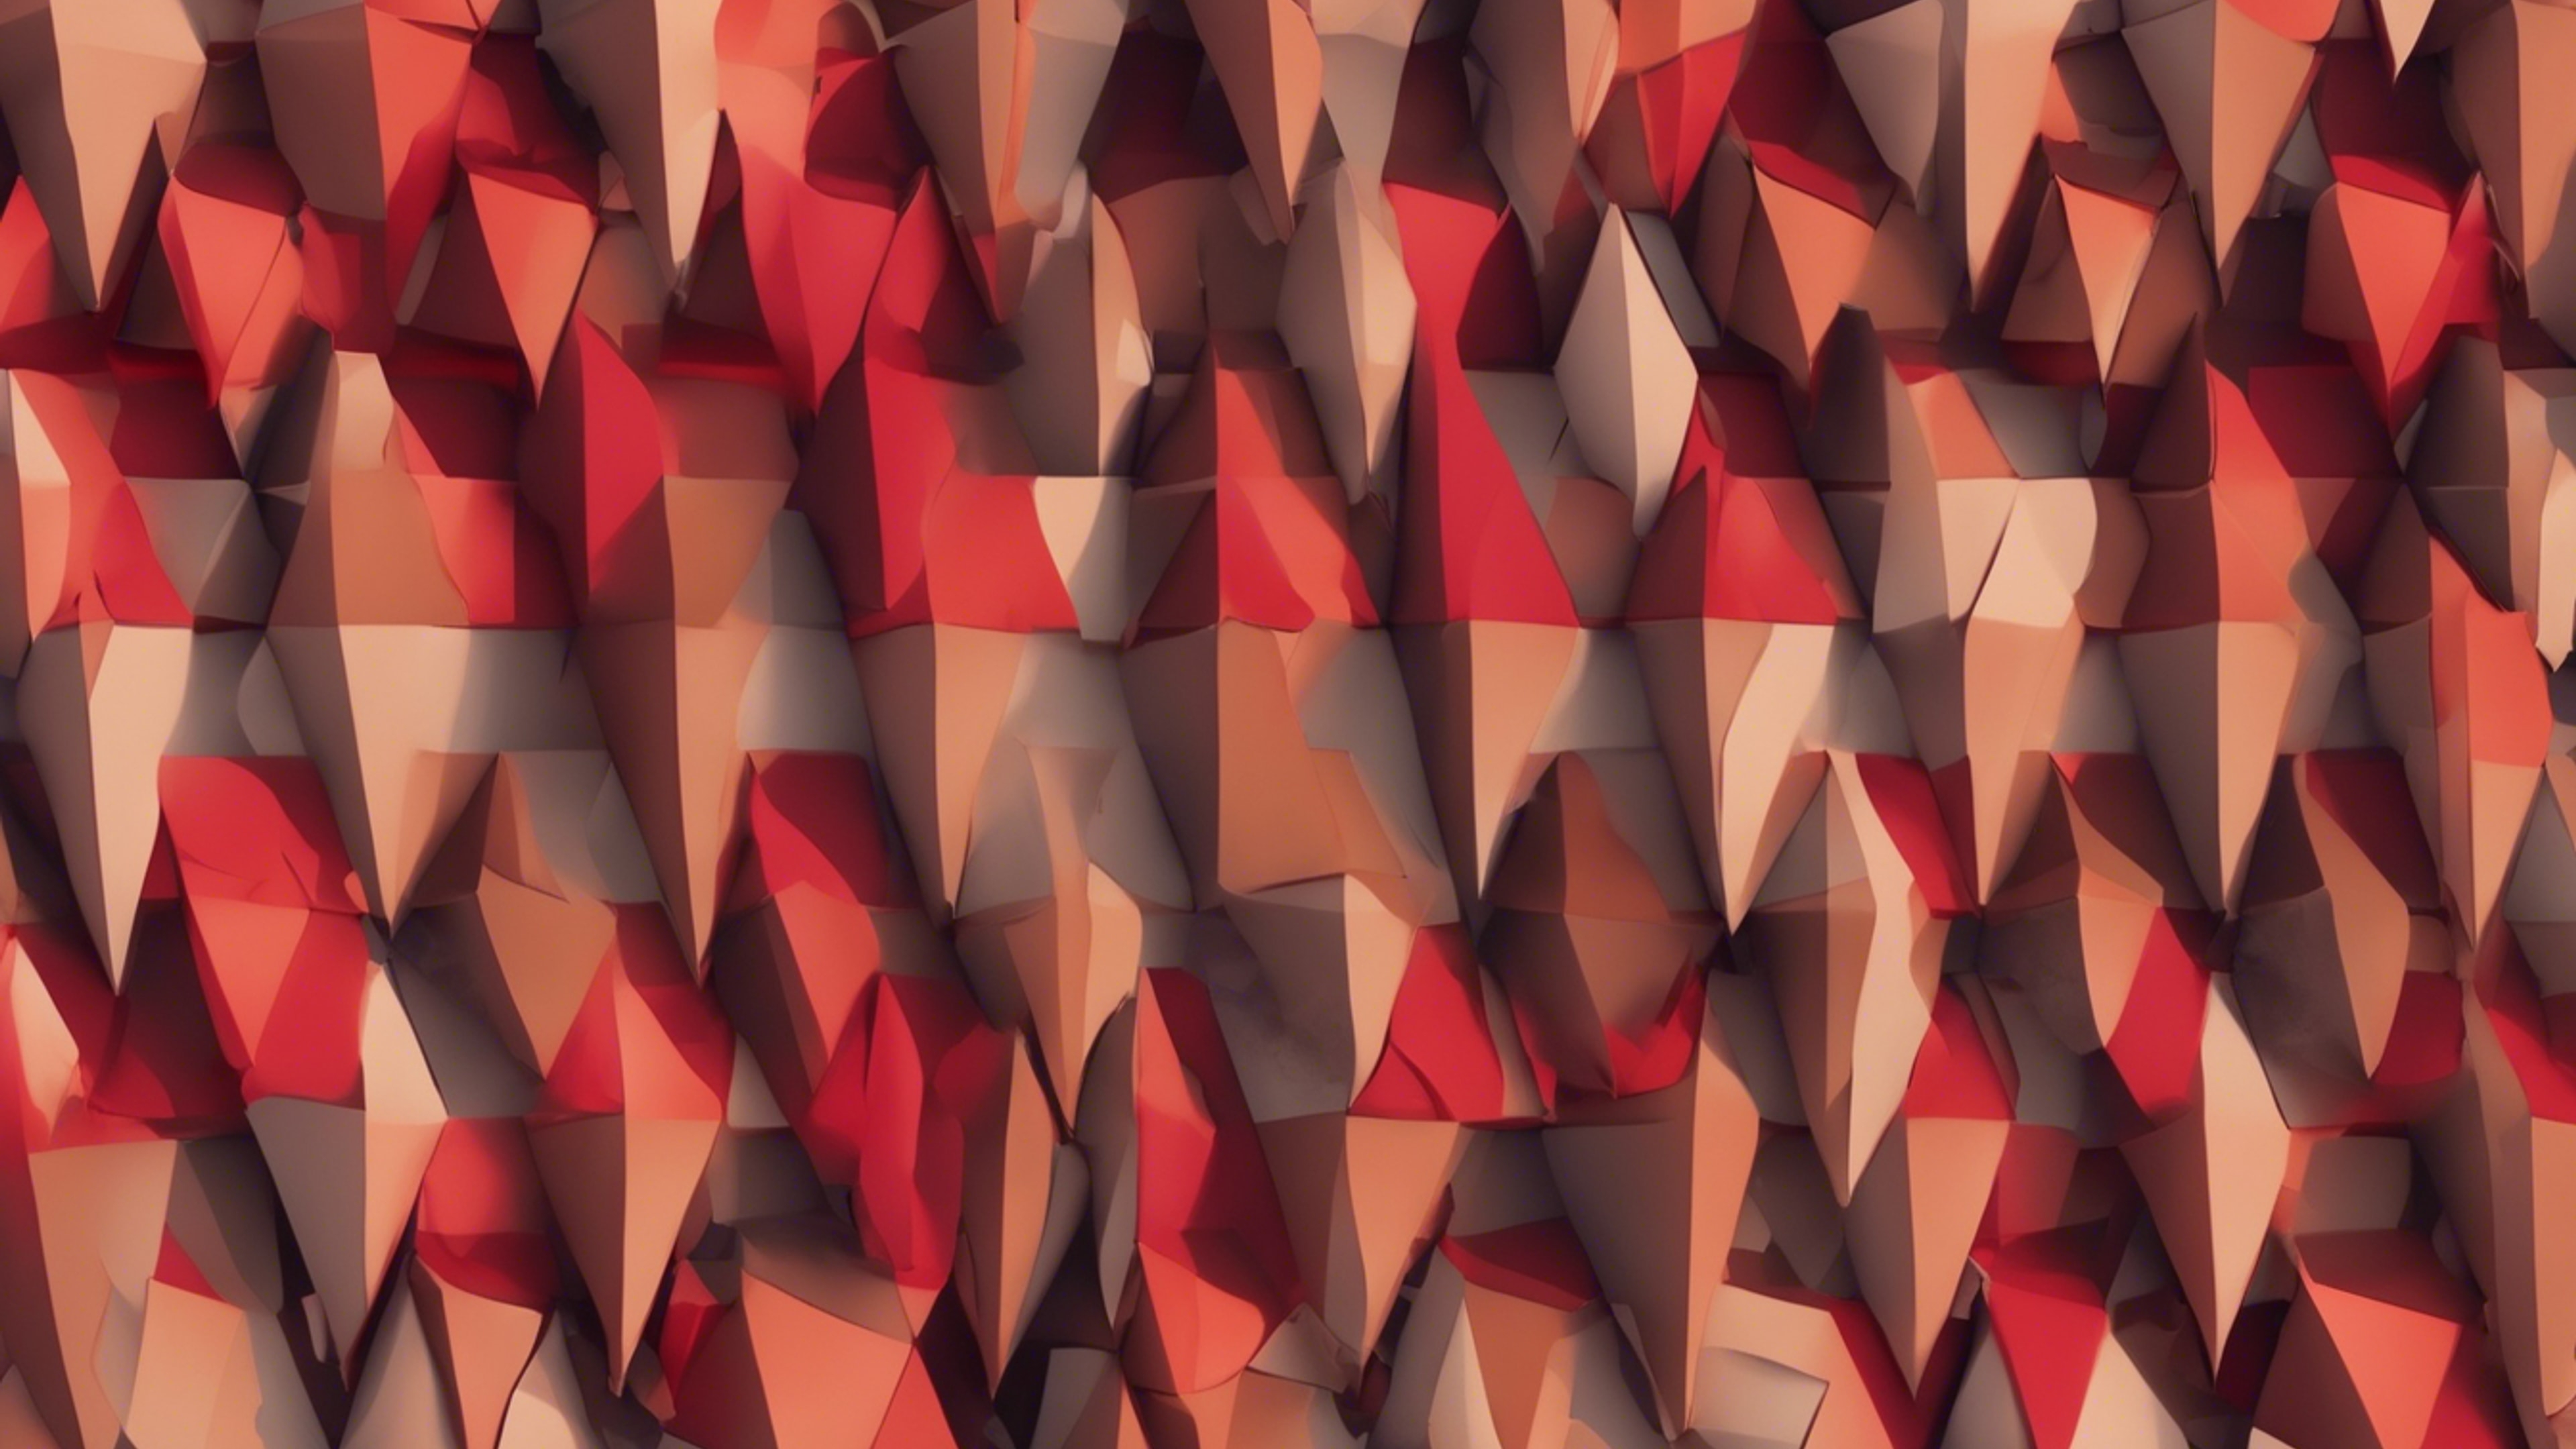 A geometrical abstract pattern consisting of trapeziums in shades of vibrant red and muted brown. Tapeta[25af3713355d4095863a]